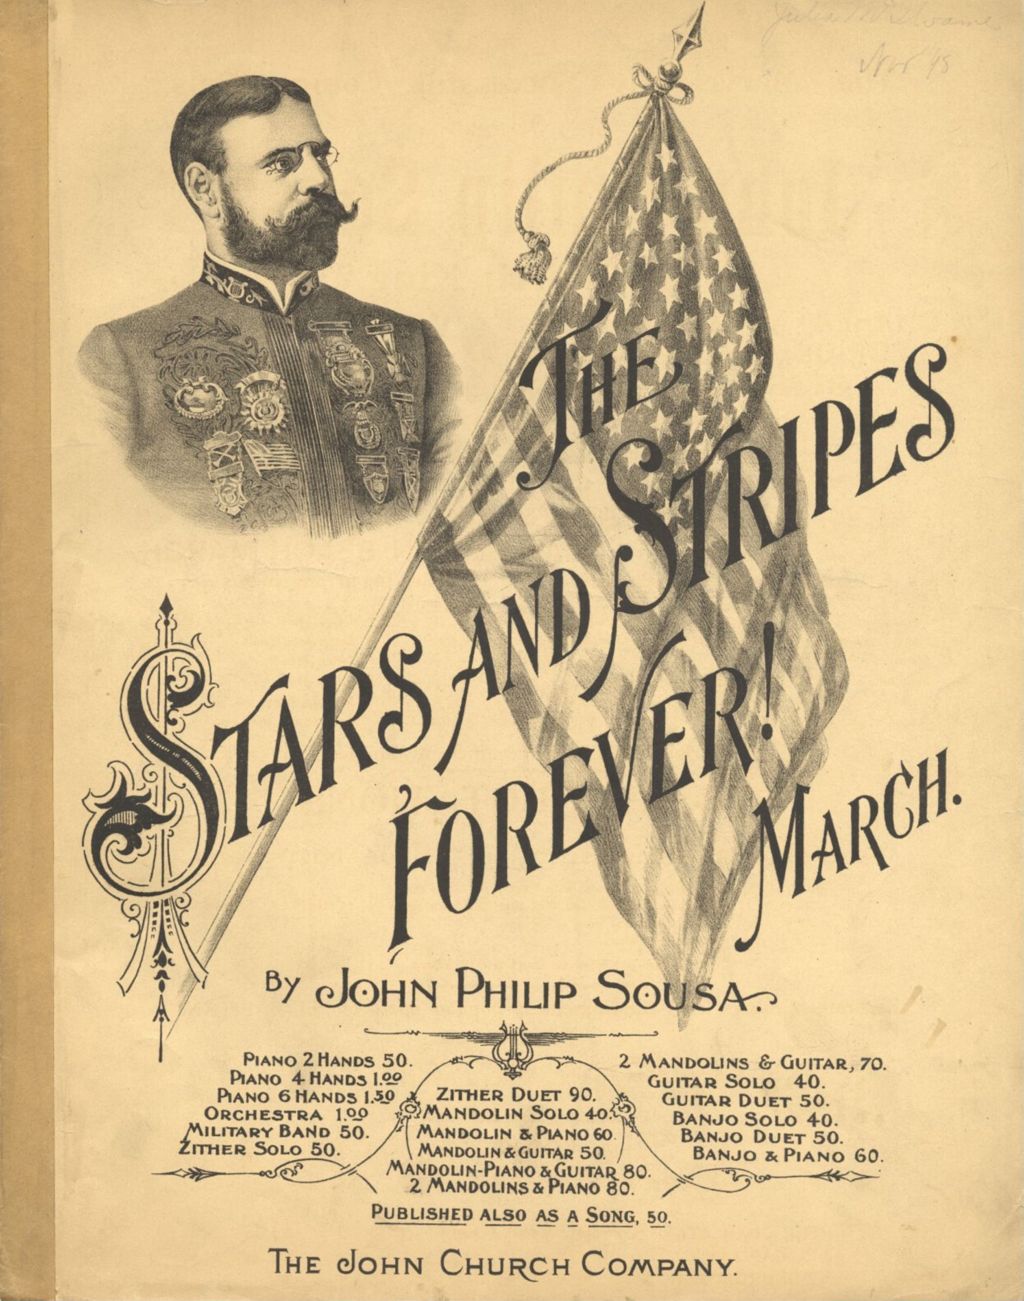 Miniature of Stars and Stripes Forever (March)